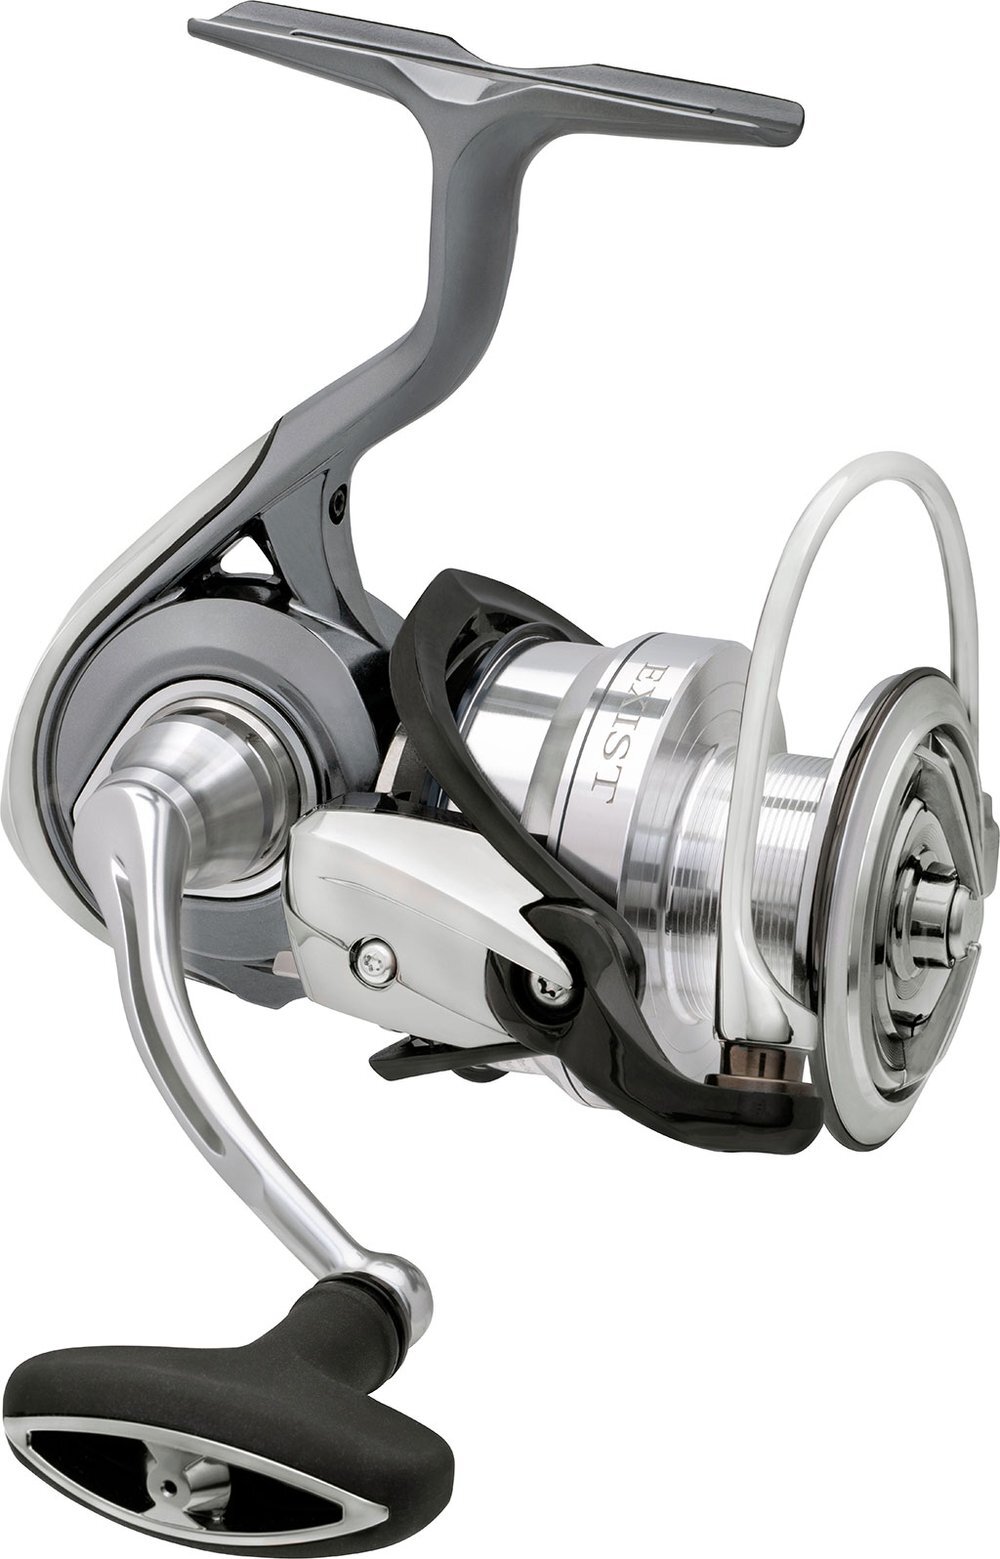 Daiwa Exist 2000 DP LT Spinning Fishing Reel NEW @ Otto/'s Tackle World